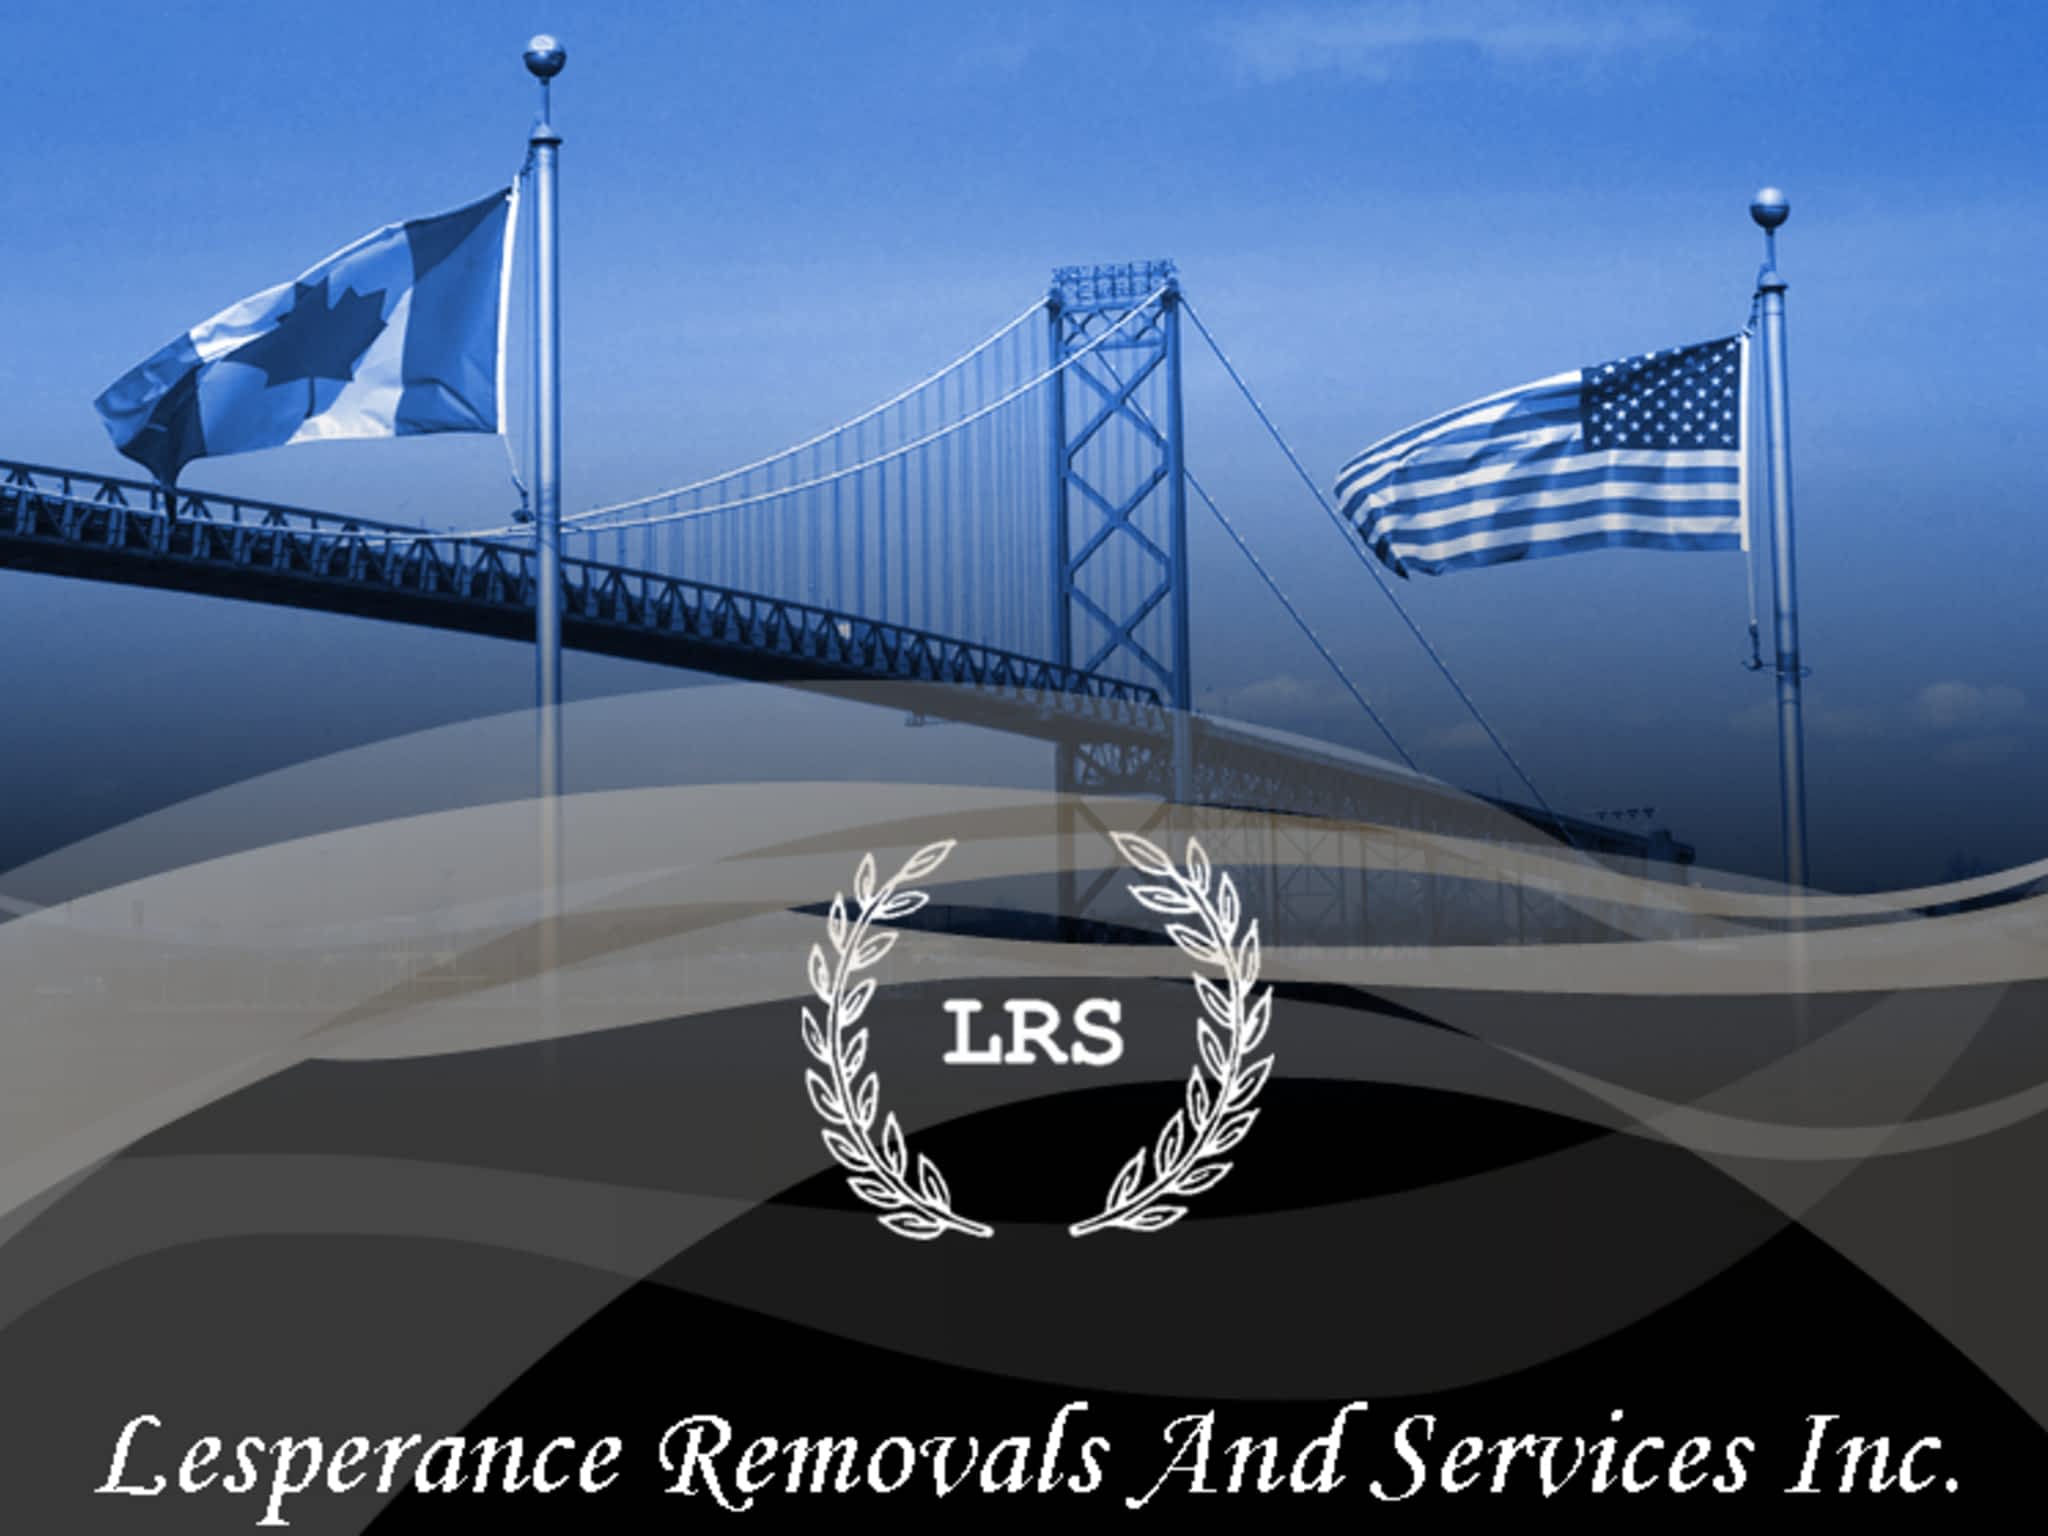 photo Lesperance Removals And Services Inc